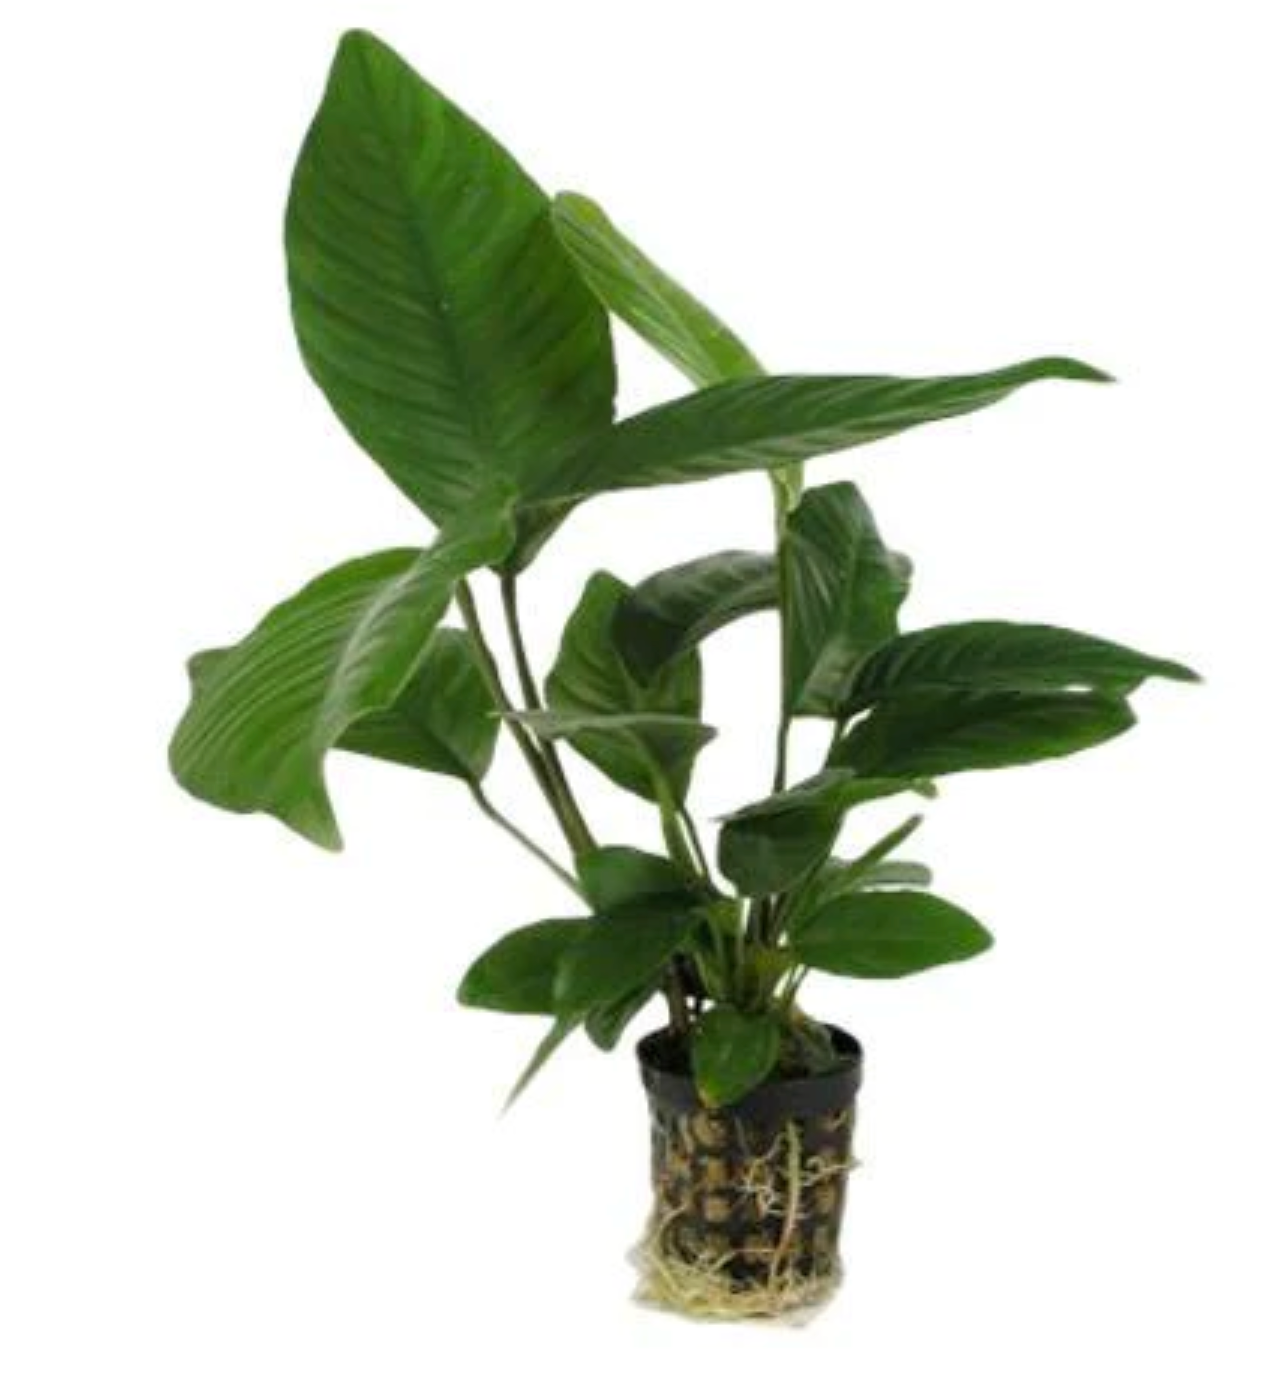 Anubias are easy right? If you struggle, read on...